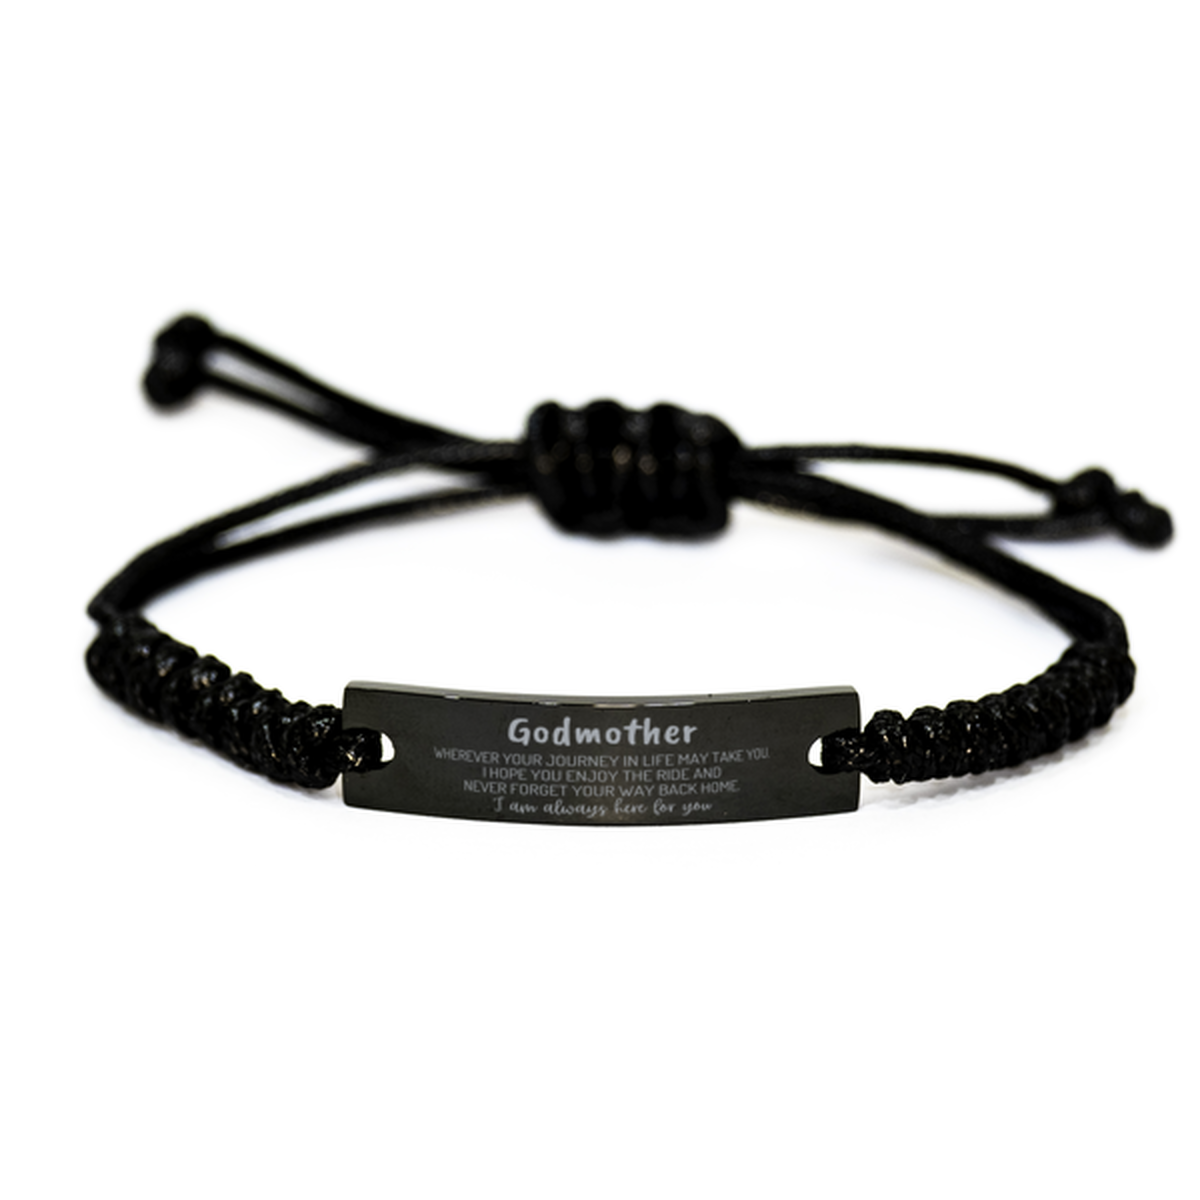 Godmother wherever your journey in life may take you, I am always here for you Godmother Black Rope Bracelet, Awesome Christmas Gifts For Godmother, Godmother Birthday Gifts for Men Women Family Loved One